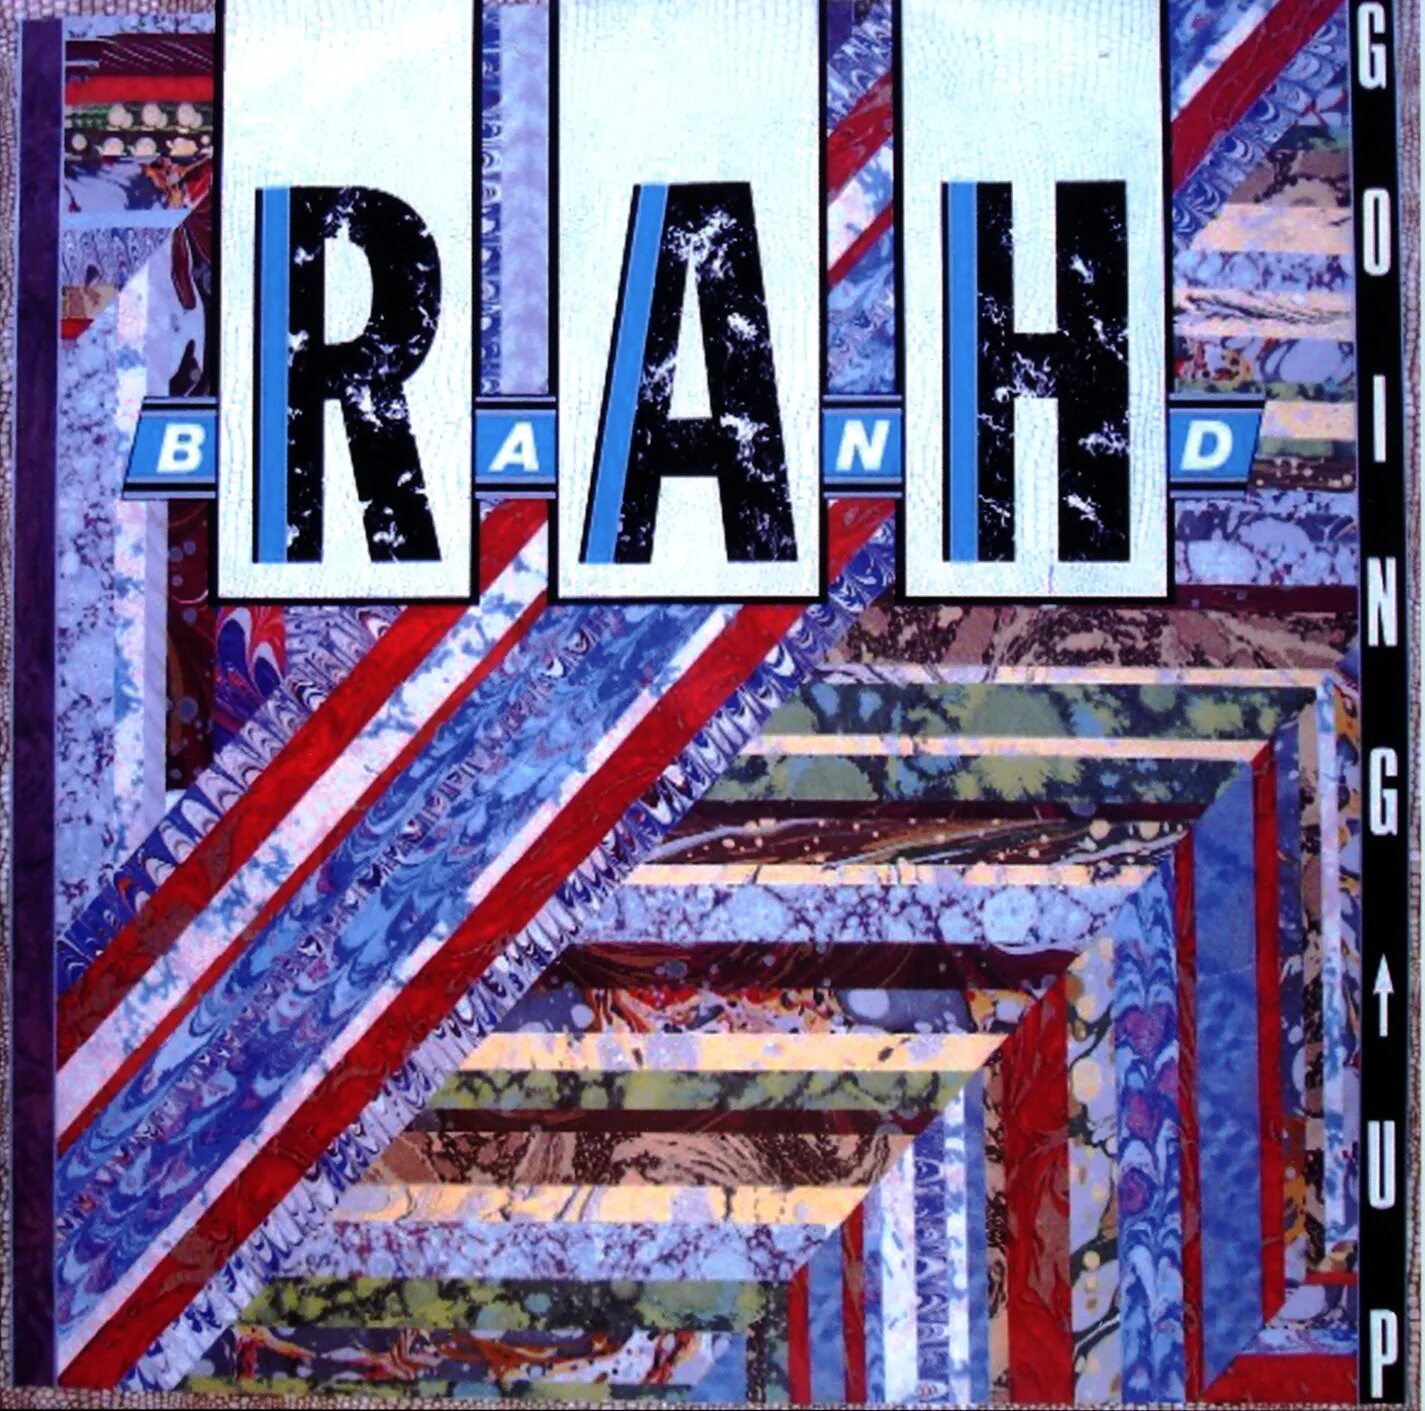 Message band. Rah Band going up  1983. The Rah Band. Messages from the Stars Rah Band. Richard Anthony Hewson Band.